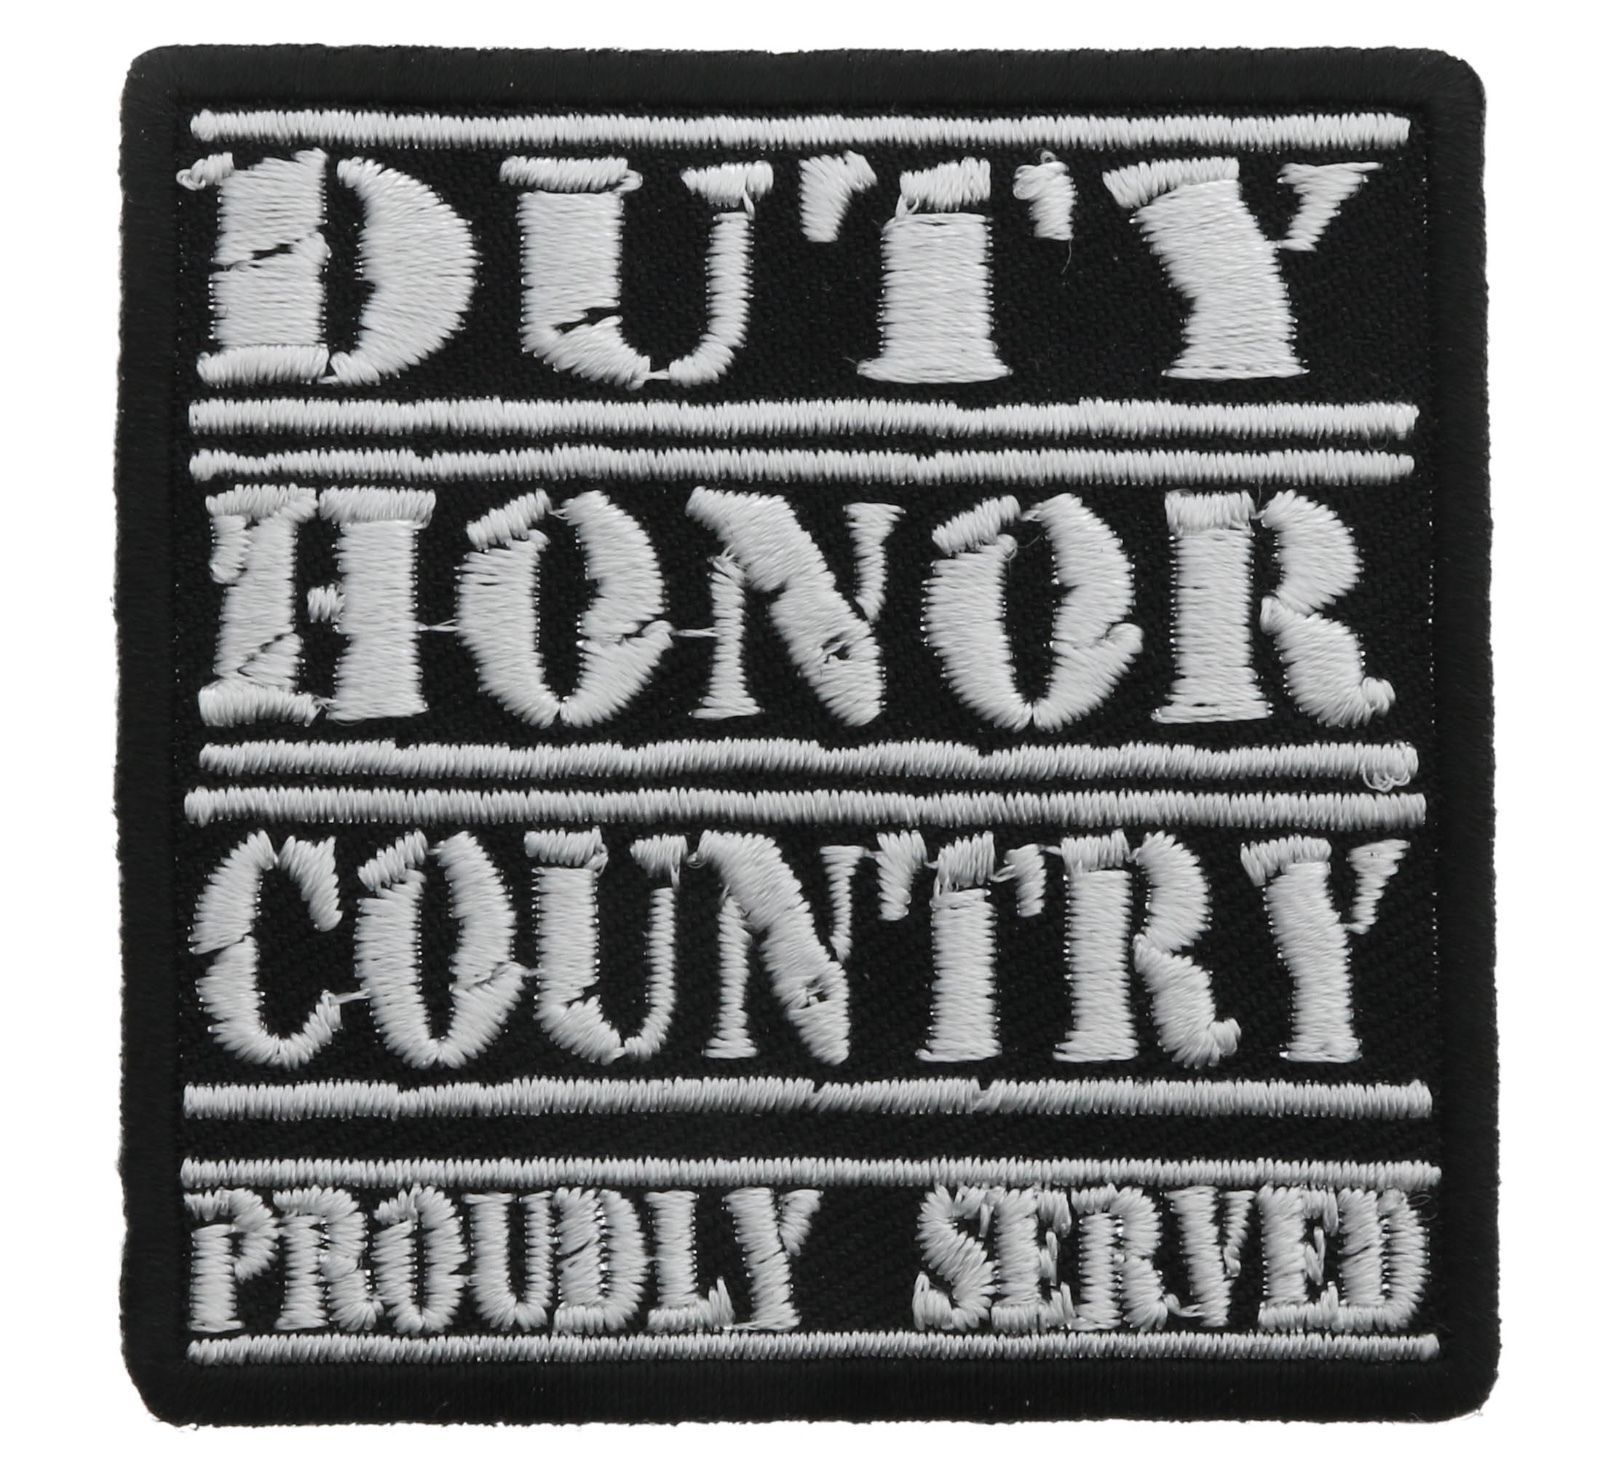 Duty Honor Country Proudly Served White on Black Military Patch IV3162 F1D1A